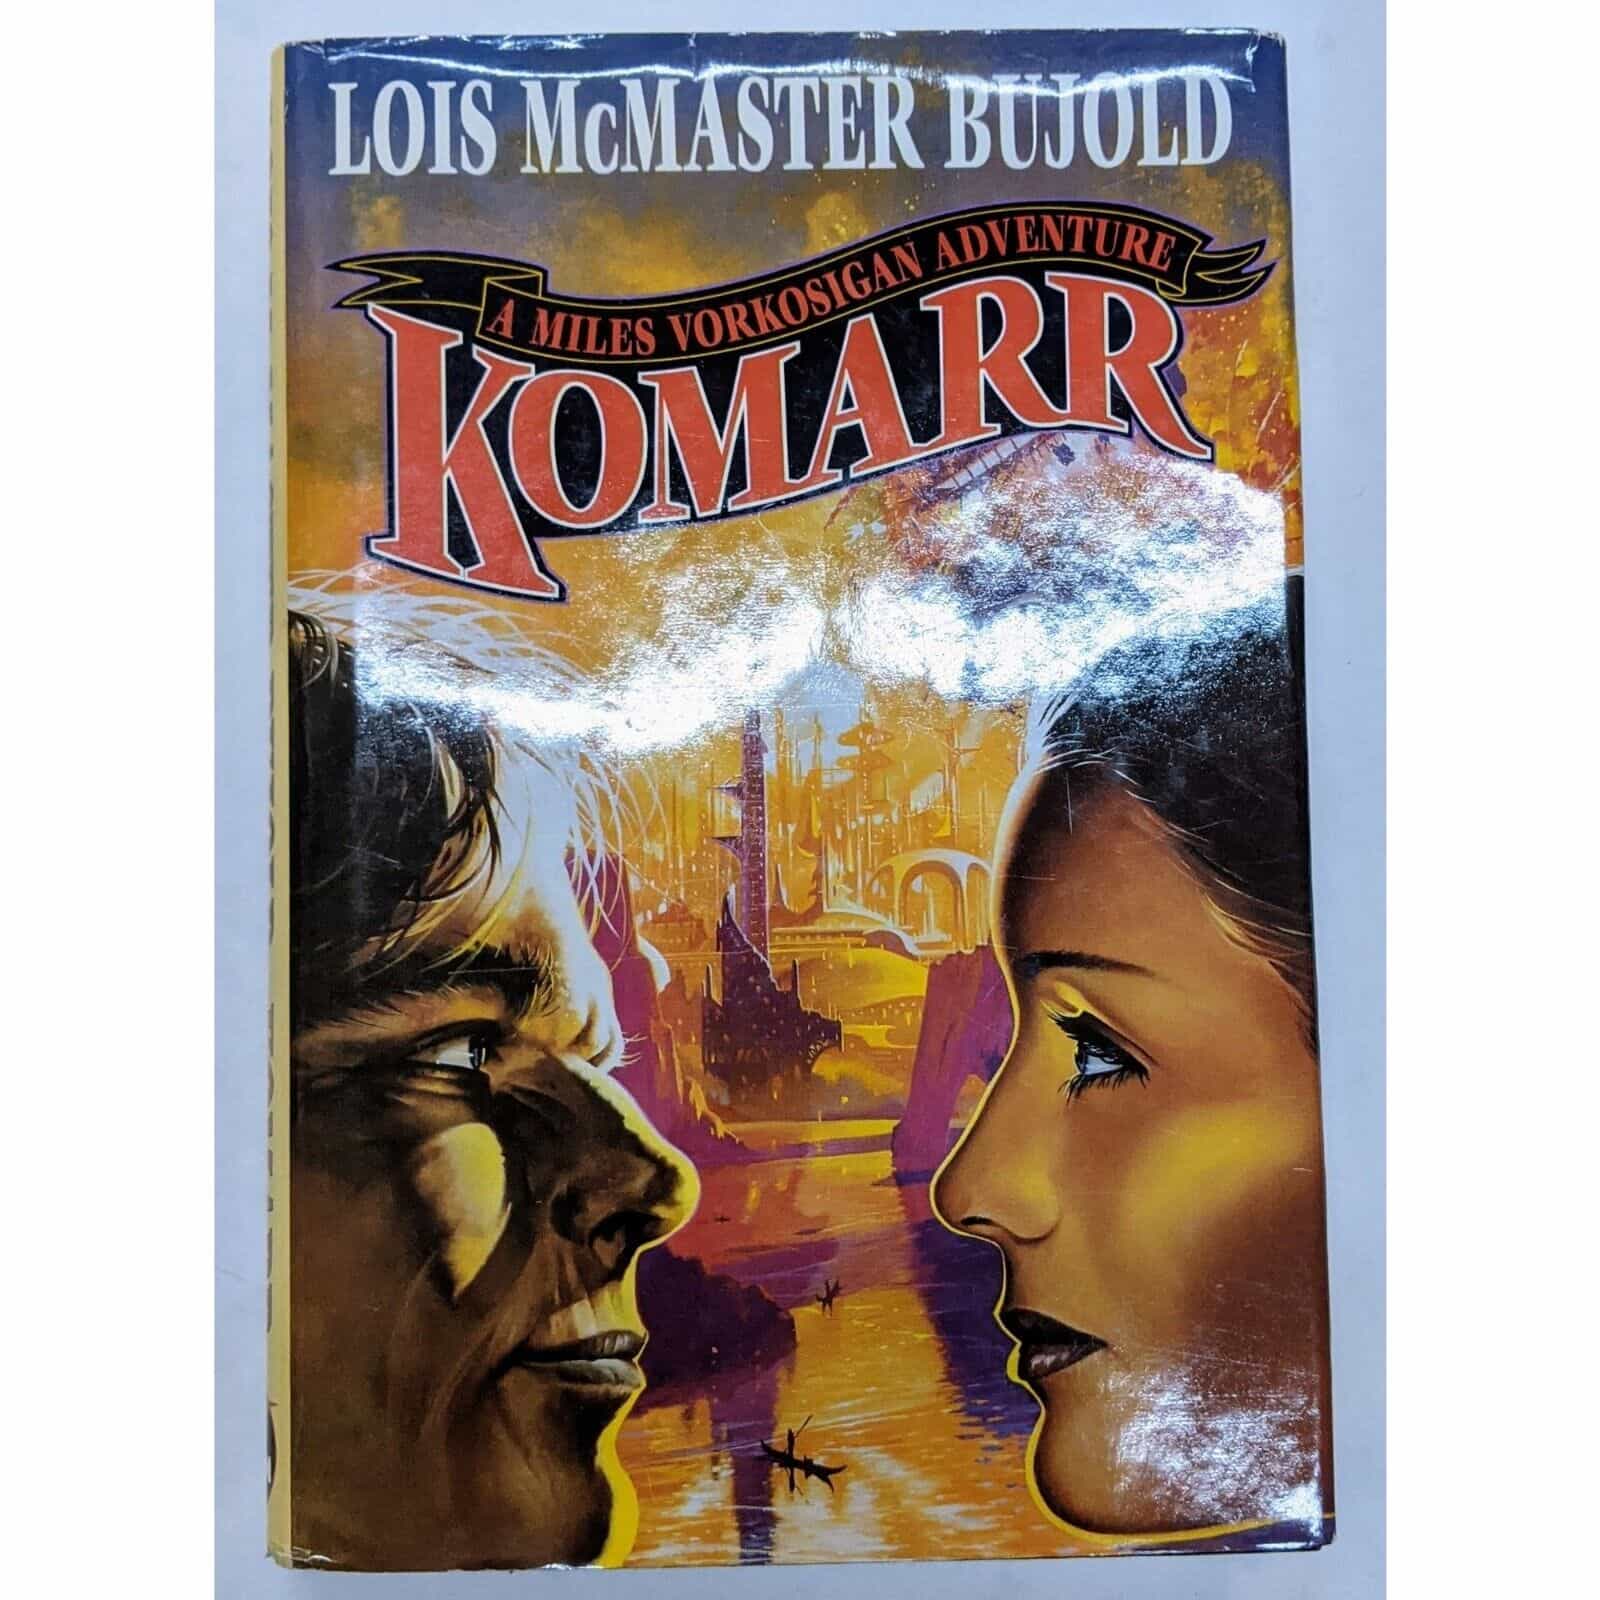 Komarr by Lois McMaster Bujold Book